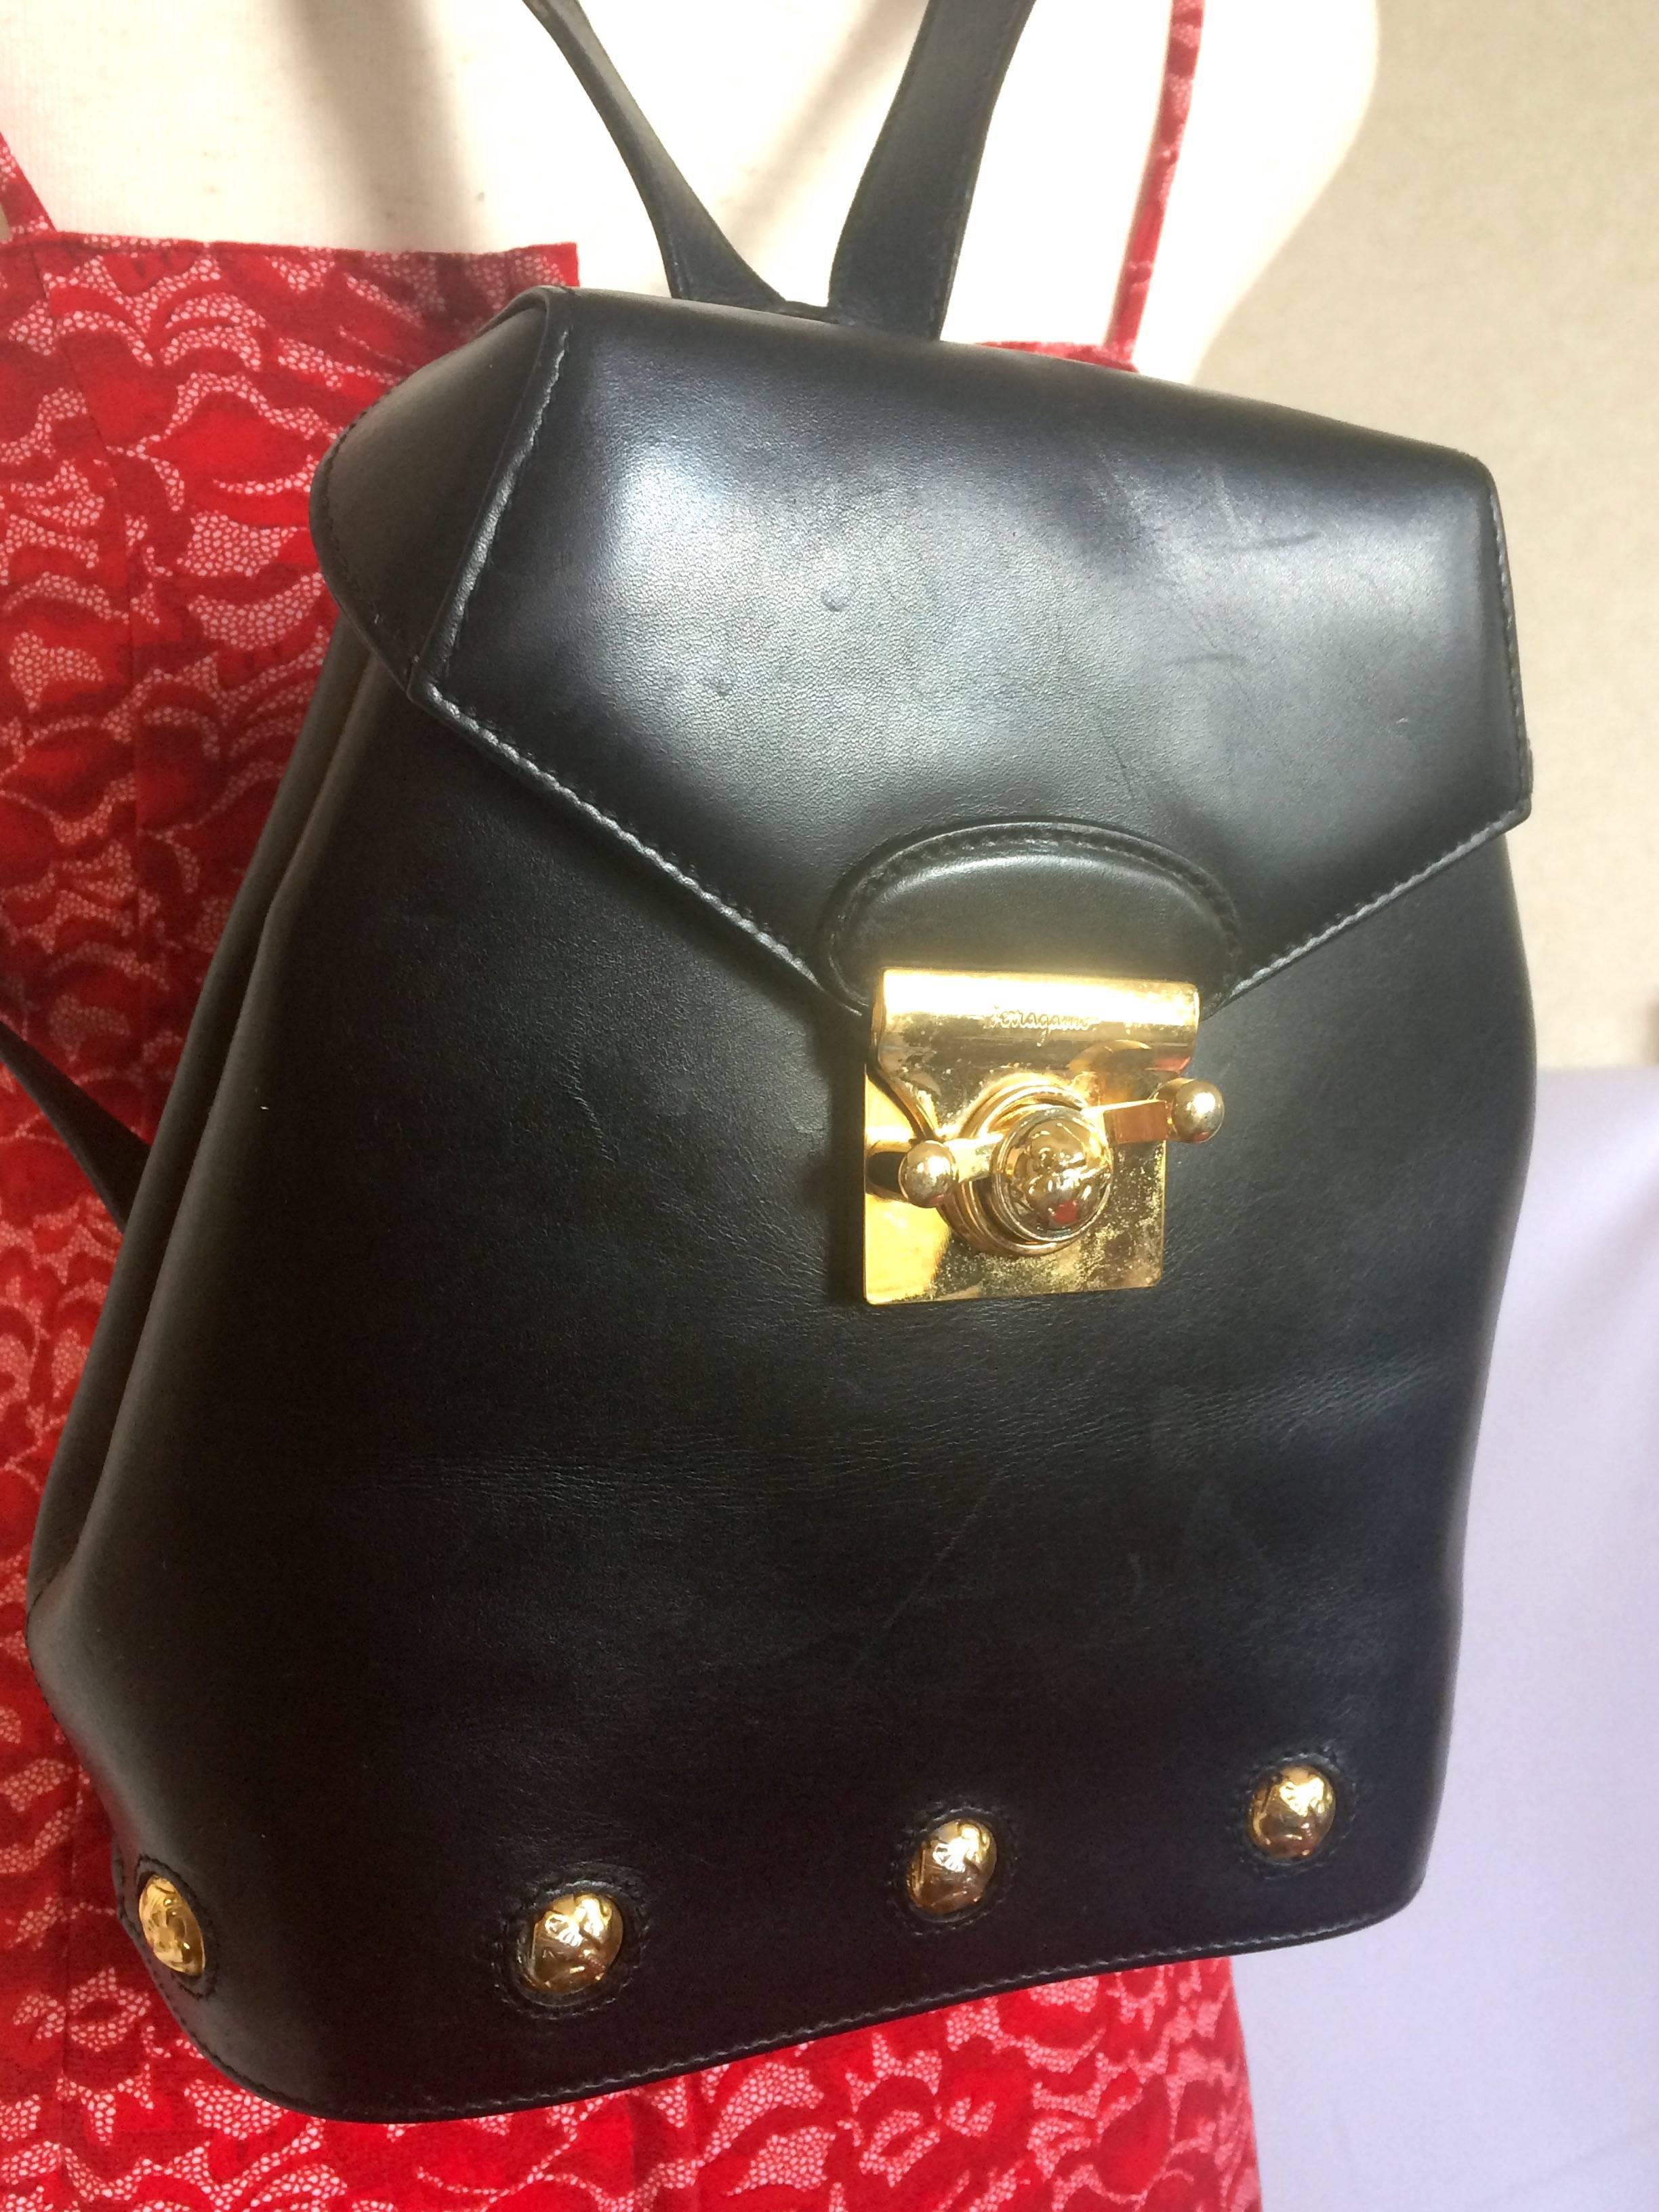 1990s. Vintage Salvatore Ferragamo black calf leather backpack with golden motif closure and shoe engraved motifs. Rare masterpiece.

Introducing another rare masterpiece from Salvatore Ferragamo black genuine leather backpack with gold tone